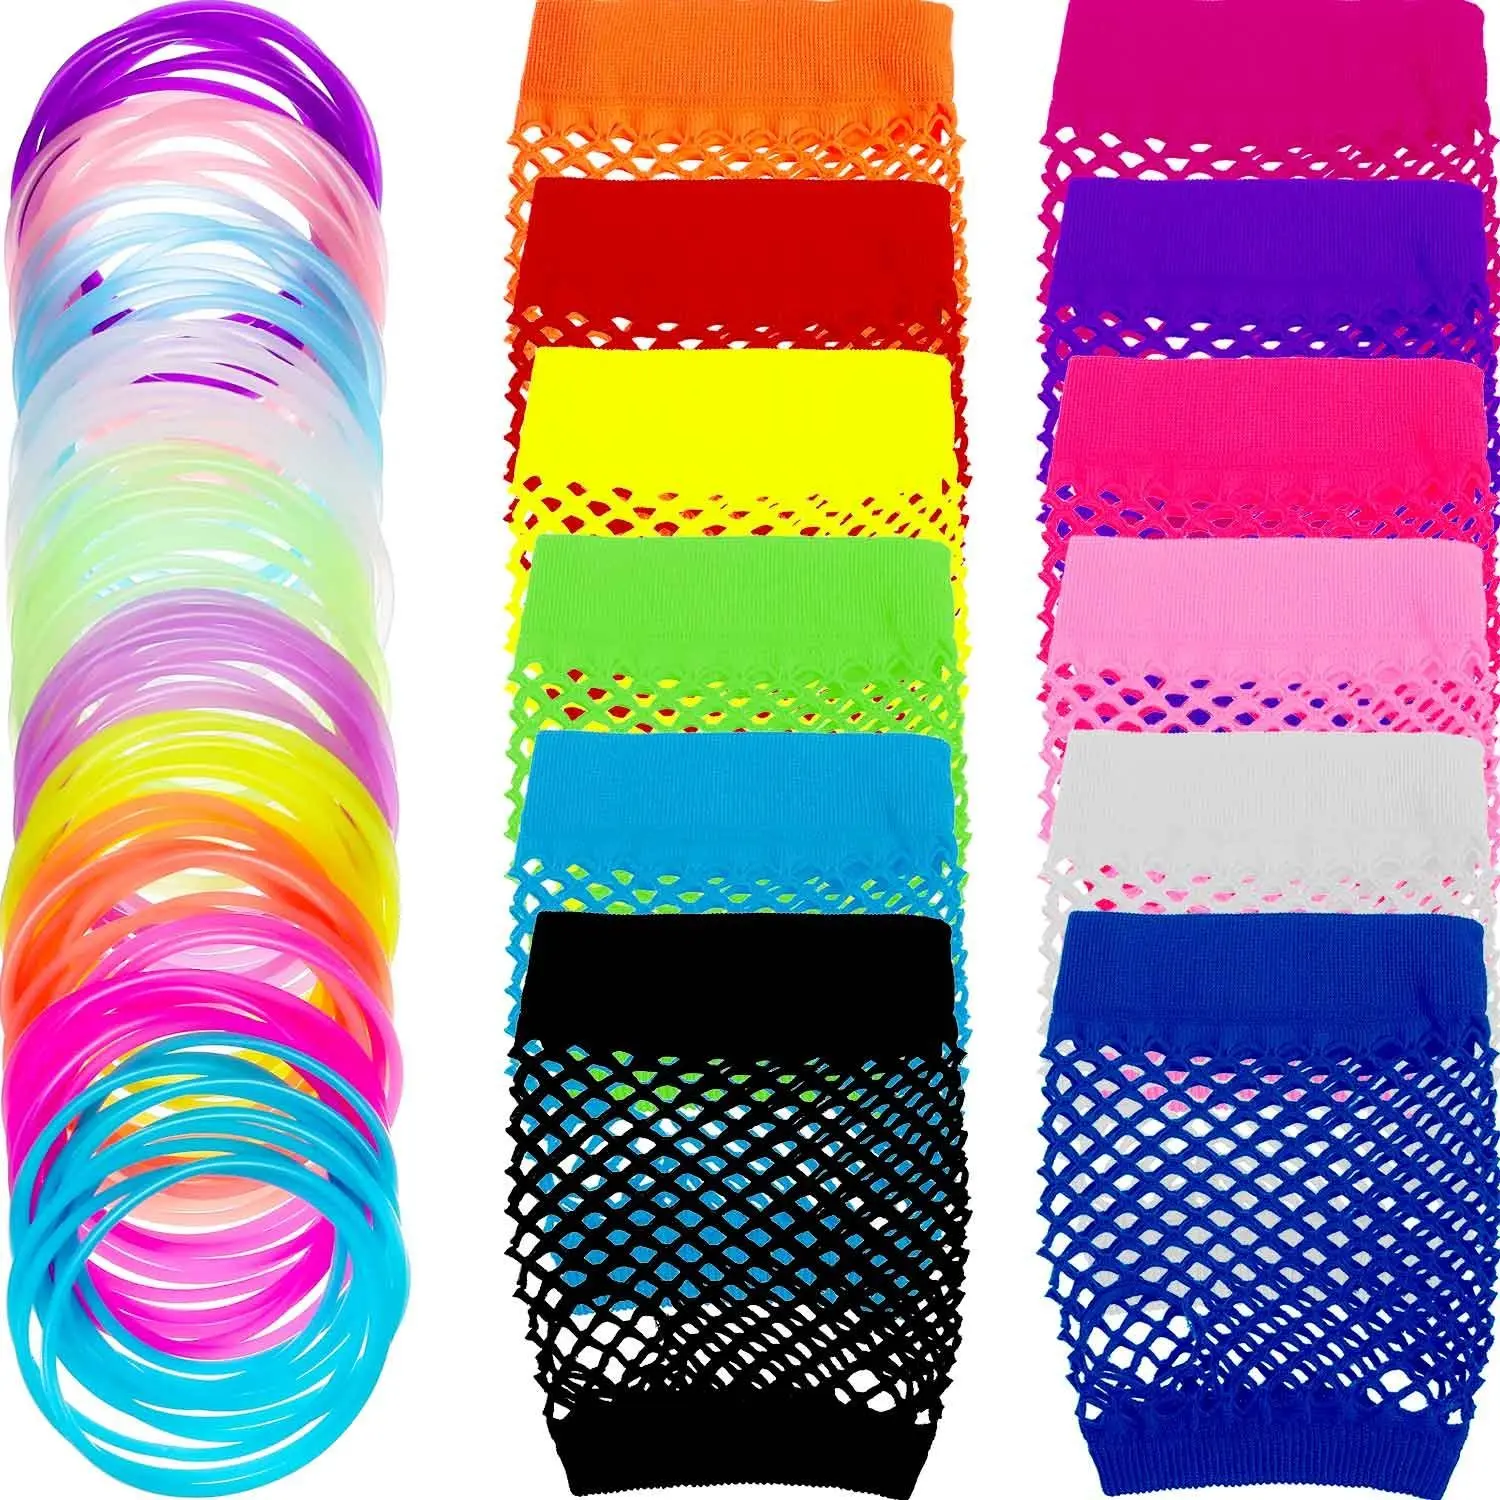 Rhode Island Novelty Neon Jelly Bracelets Assorted Colors FREESHIP for sale online 144 piece